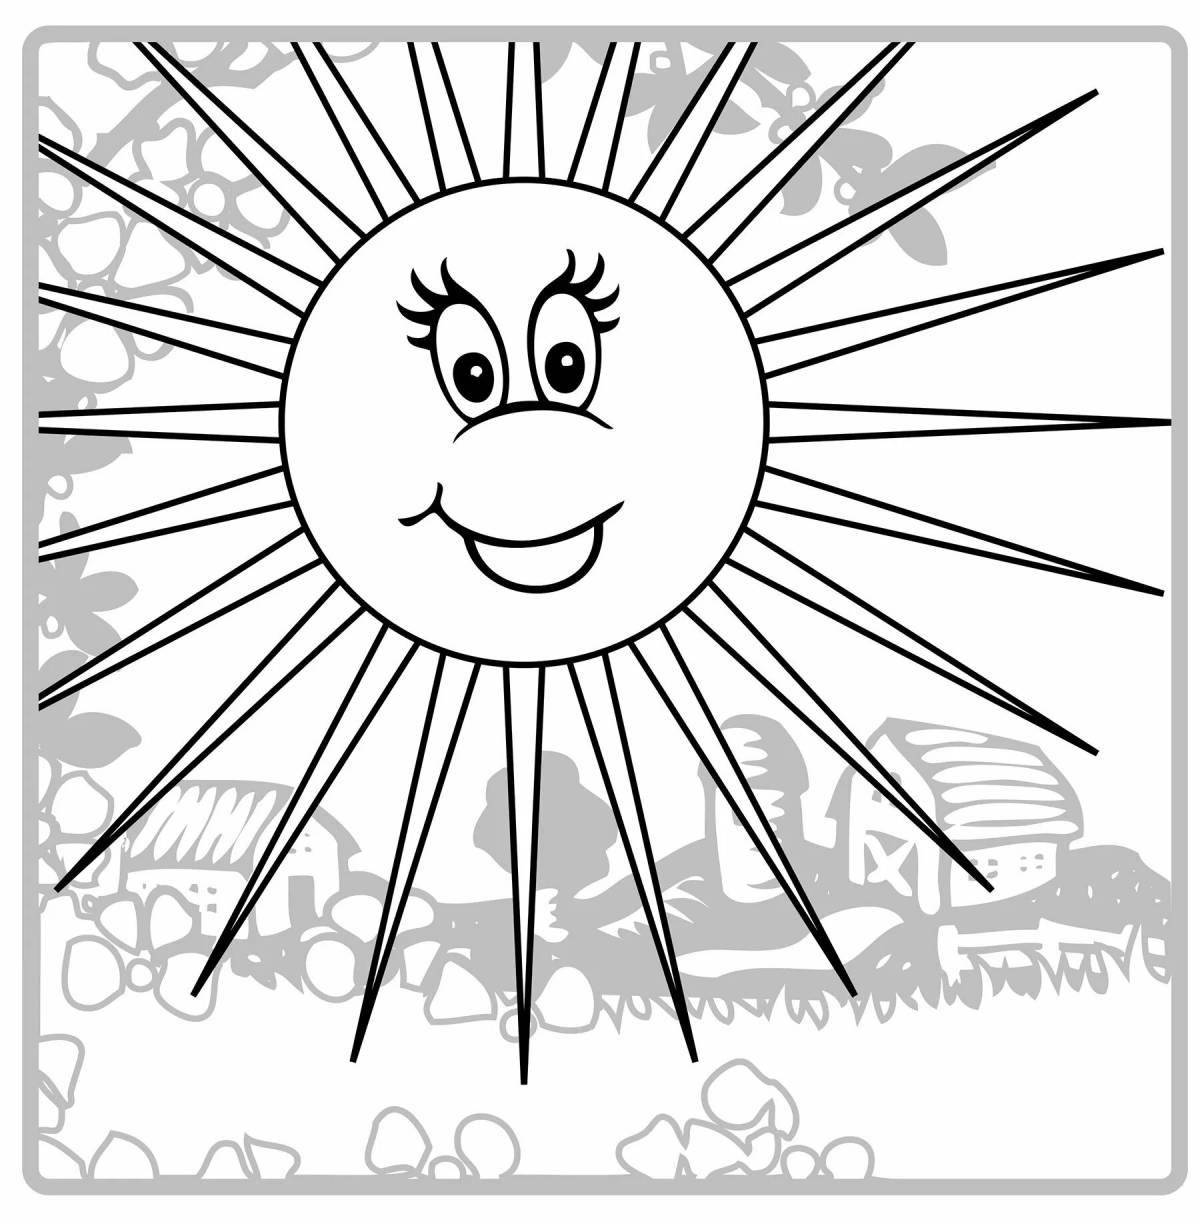 Coloring page glamorous carnival sun